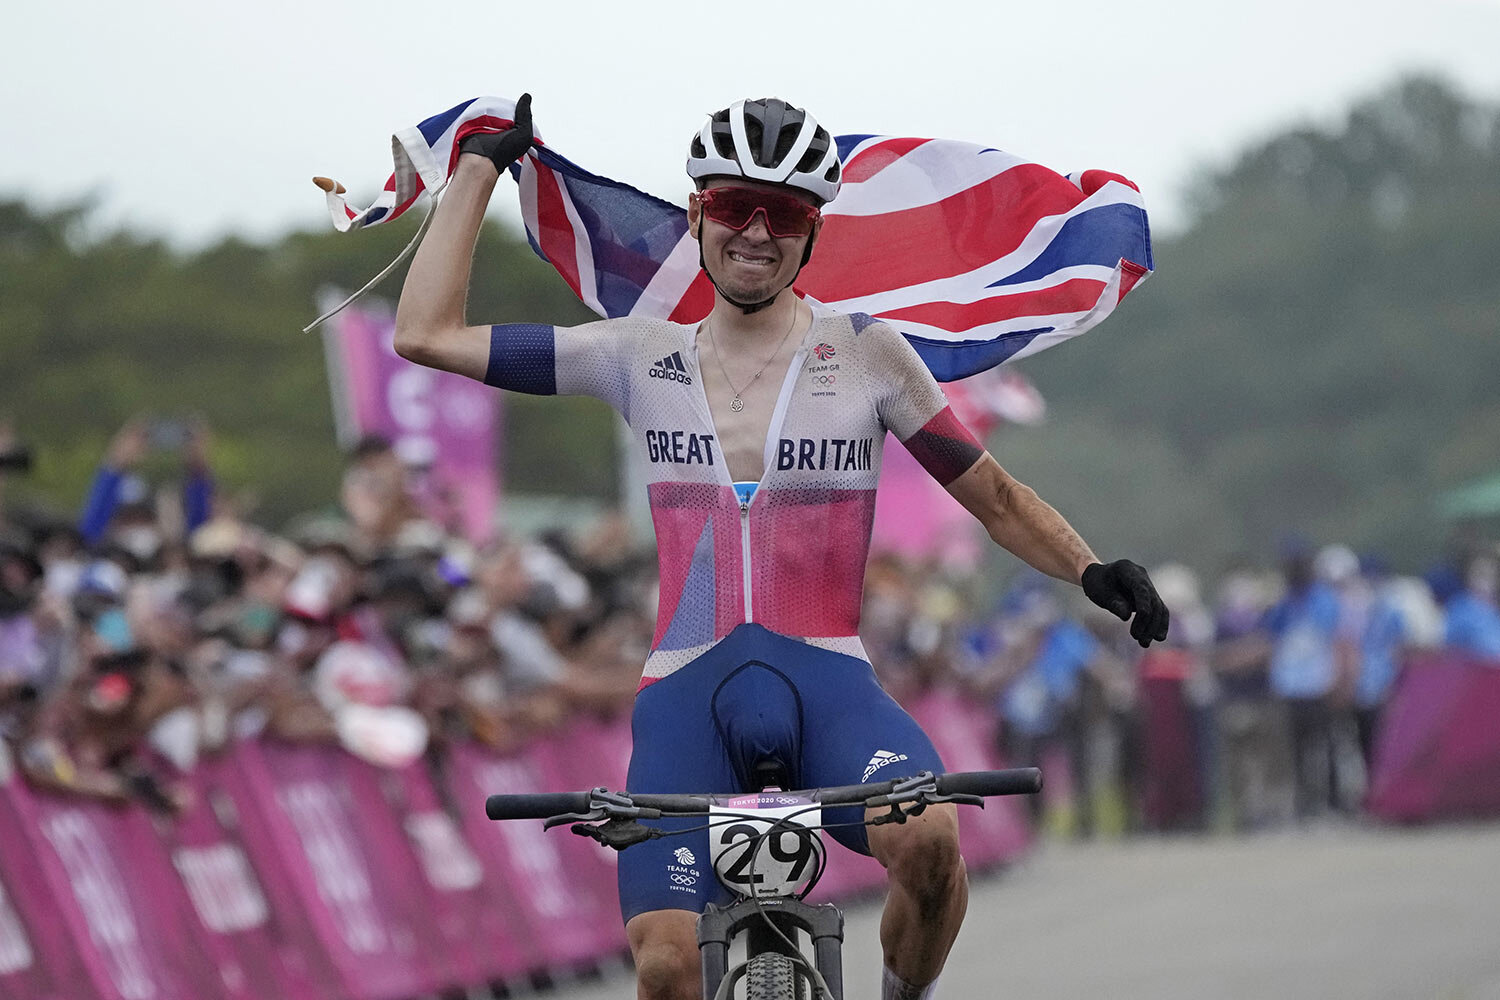  Thomas Pidcock of Great Britain celebrates as he wins the gold medal during the men's cross country mountain bike competition at the 2020 Summer Olympics, Monday, July 26, 2021, in Izu, Japan. (AP Photo/Christophe Ena) 